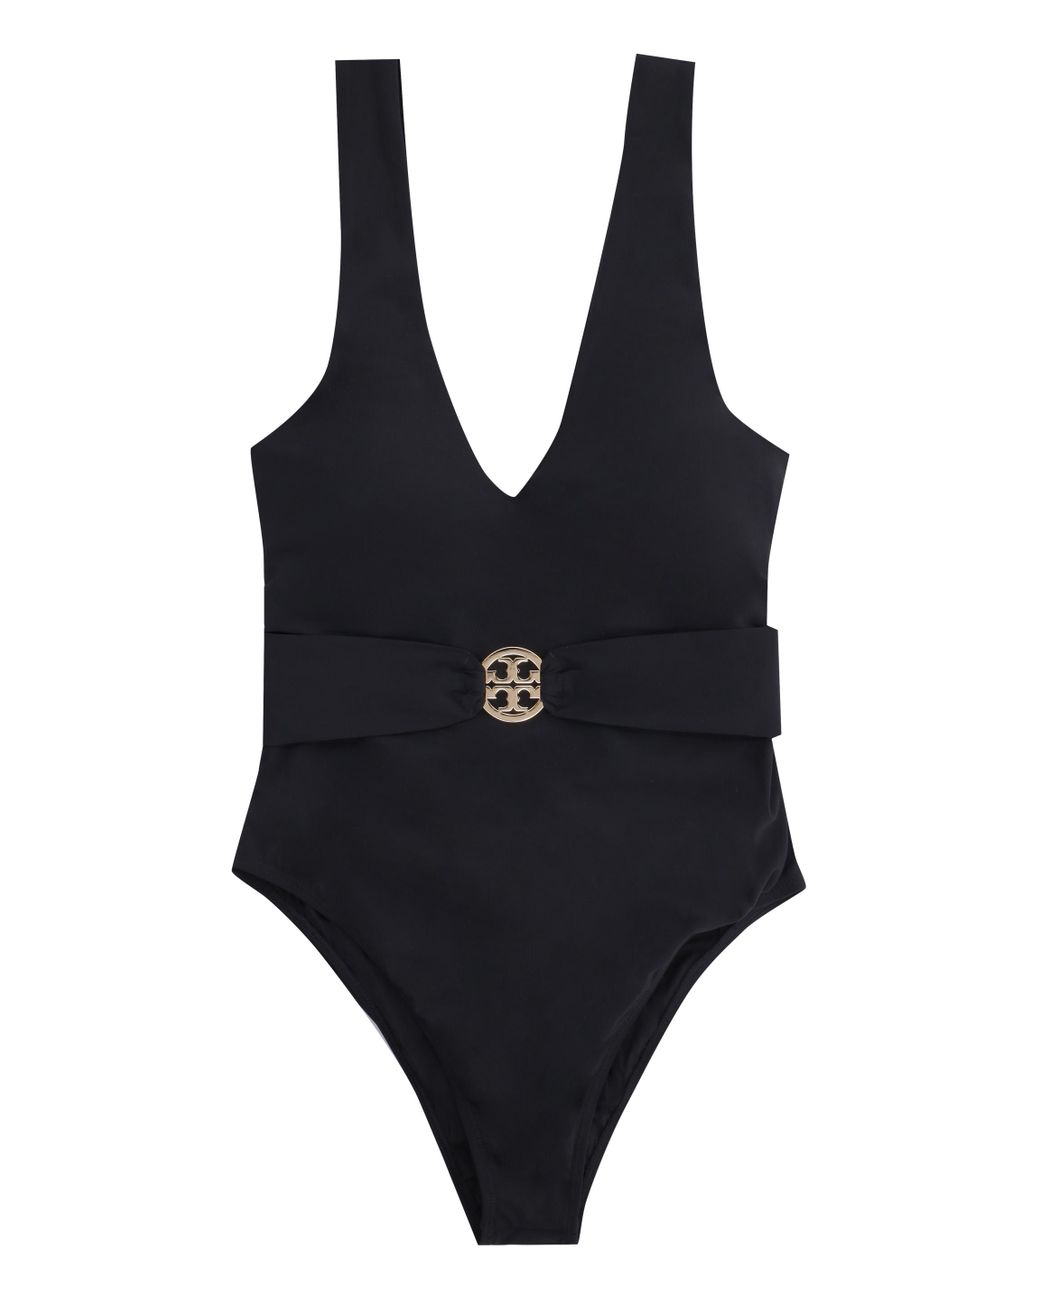 Tory Burch Synthetic One-piece Swimsuit in Black - Lyst